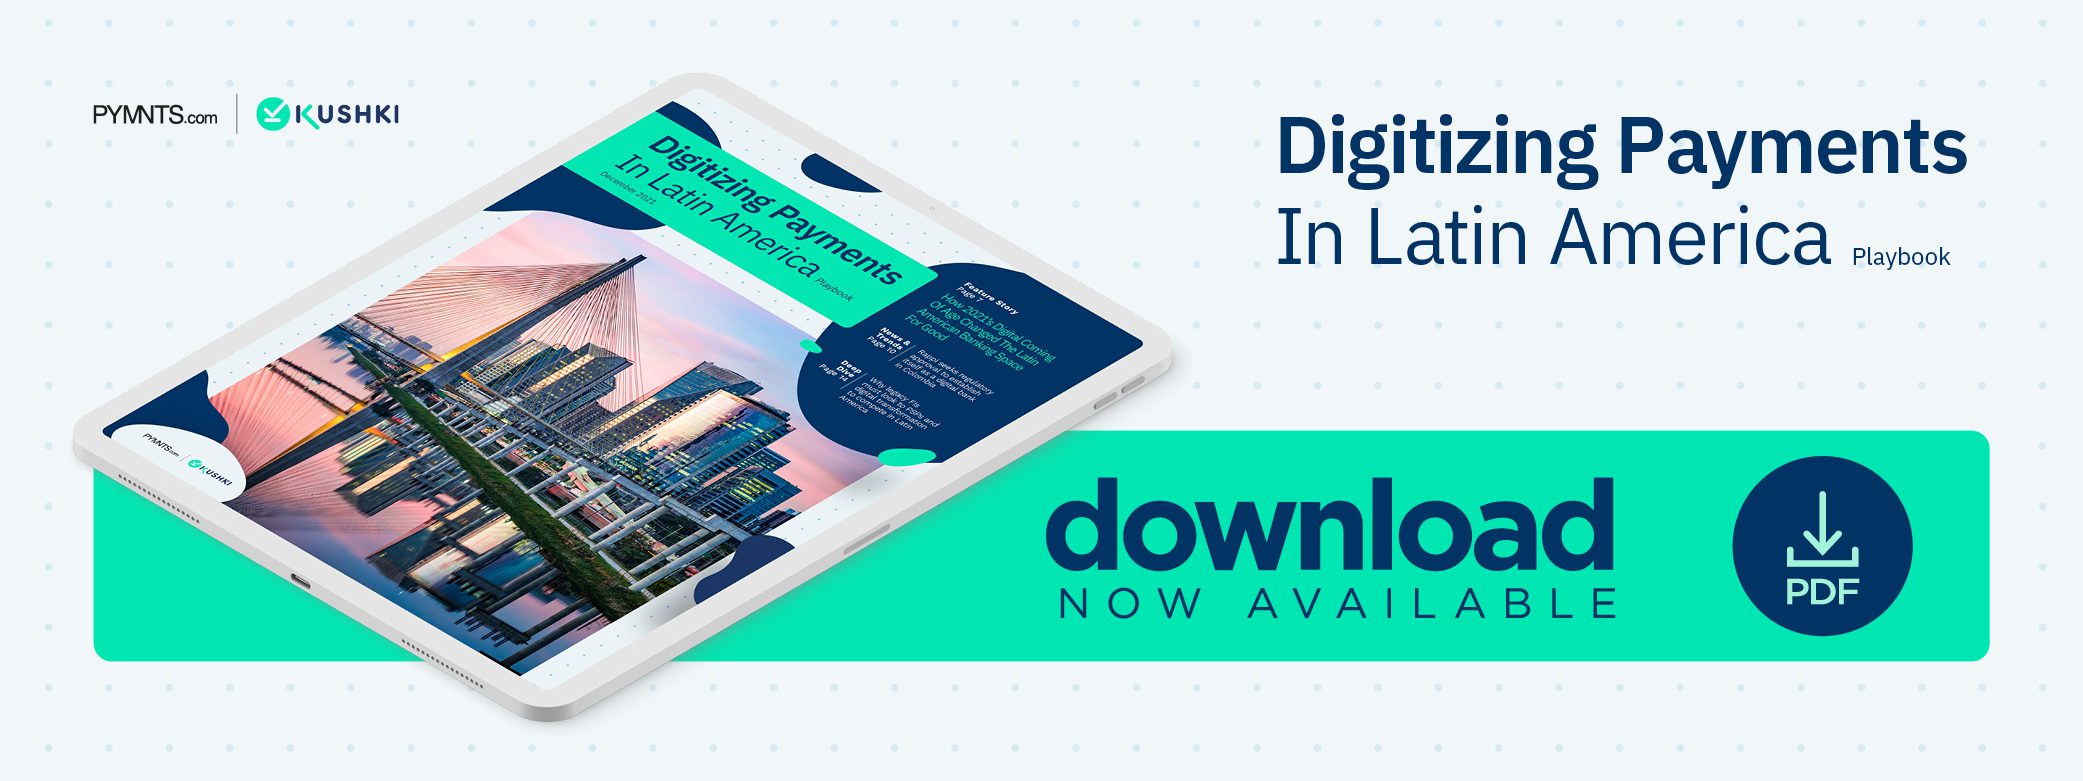 Digitizing Payments in Latin America December 2021 - Discover why partnering with payments service providers can help legacy banks in Latin America engage digital-first customers